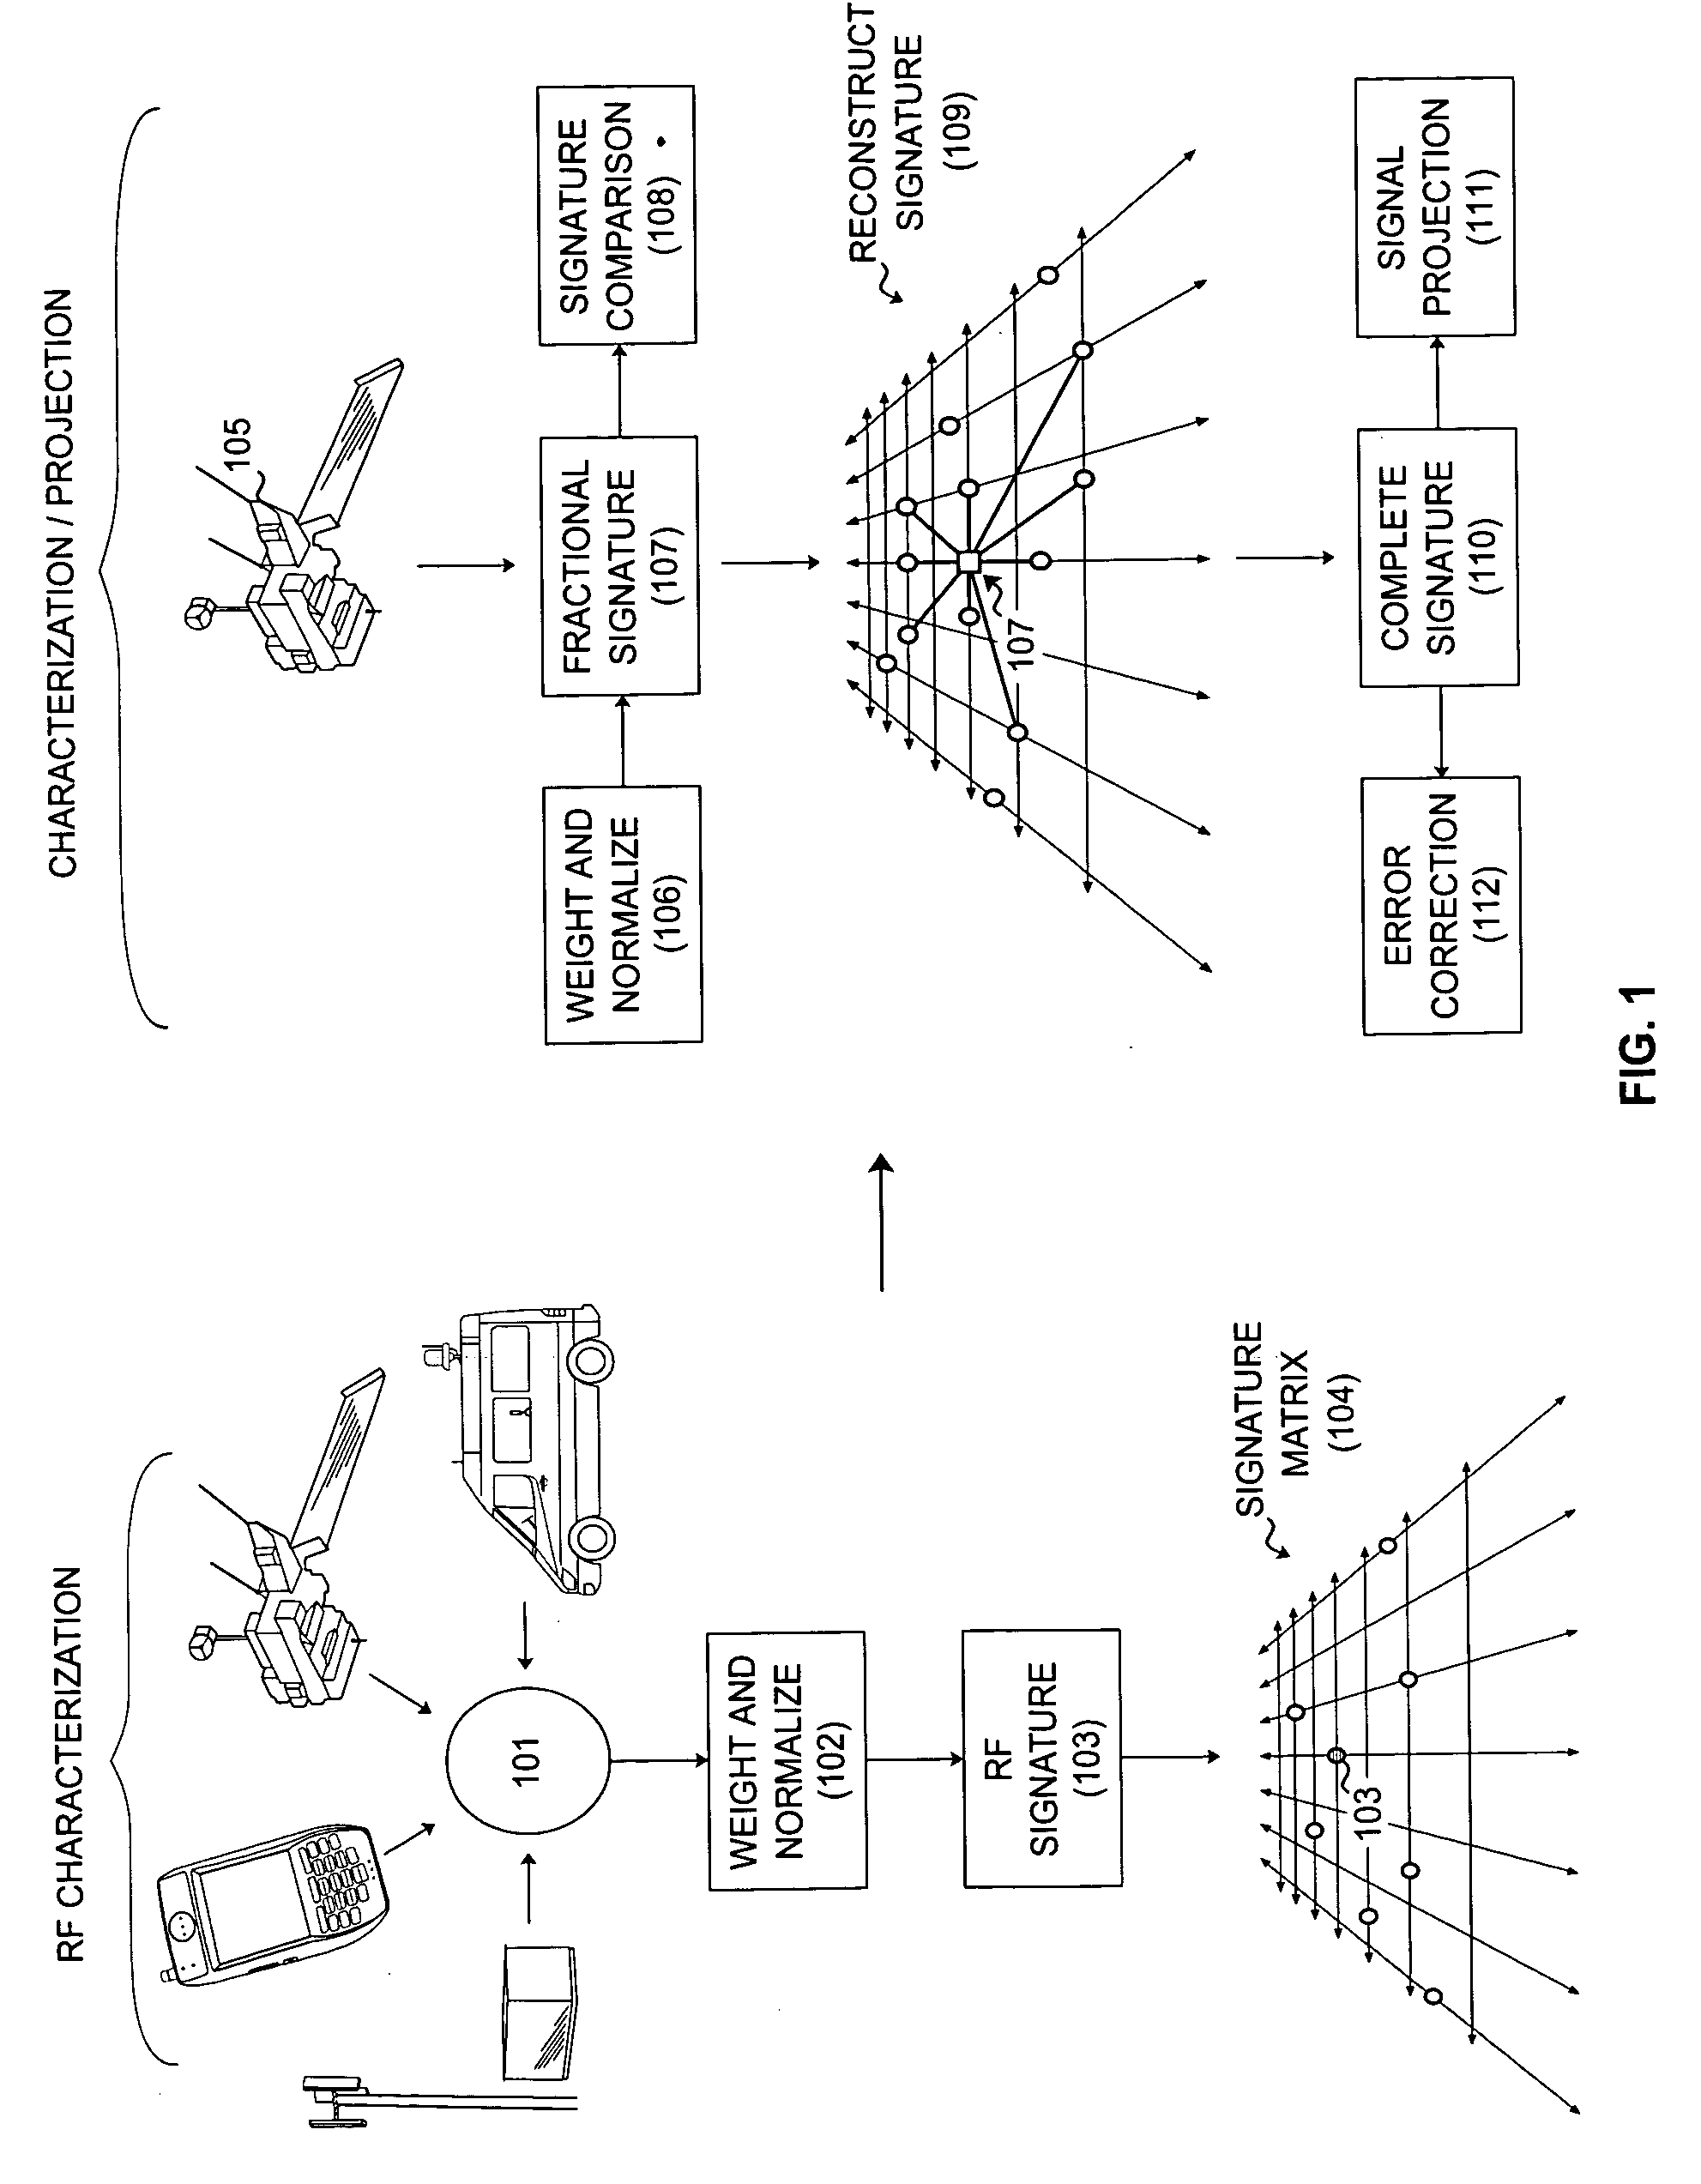 System and method for the ultra-precise analysis and characterization of RF propagation dynamics in wireless communication networks